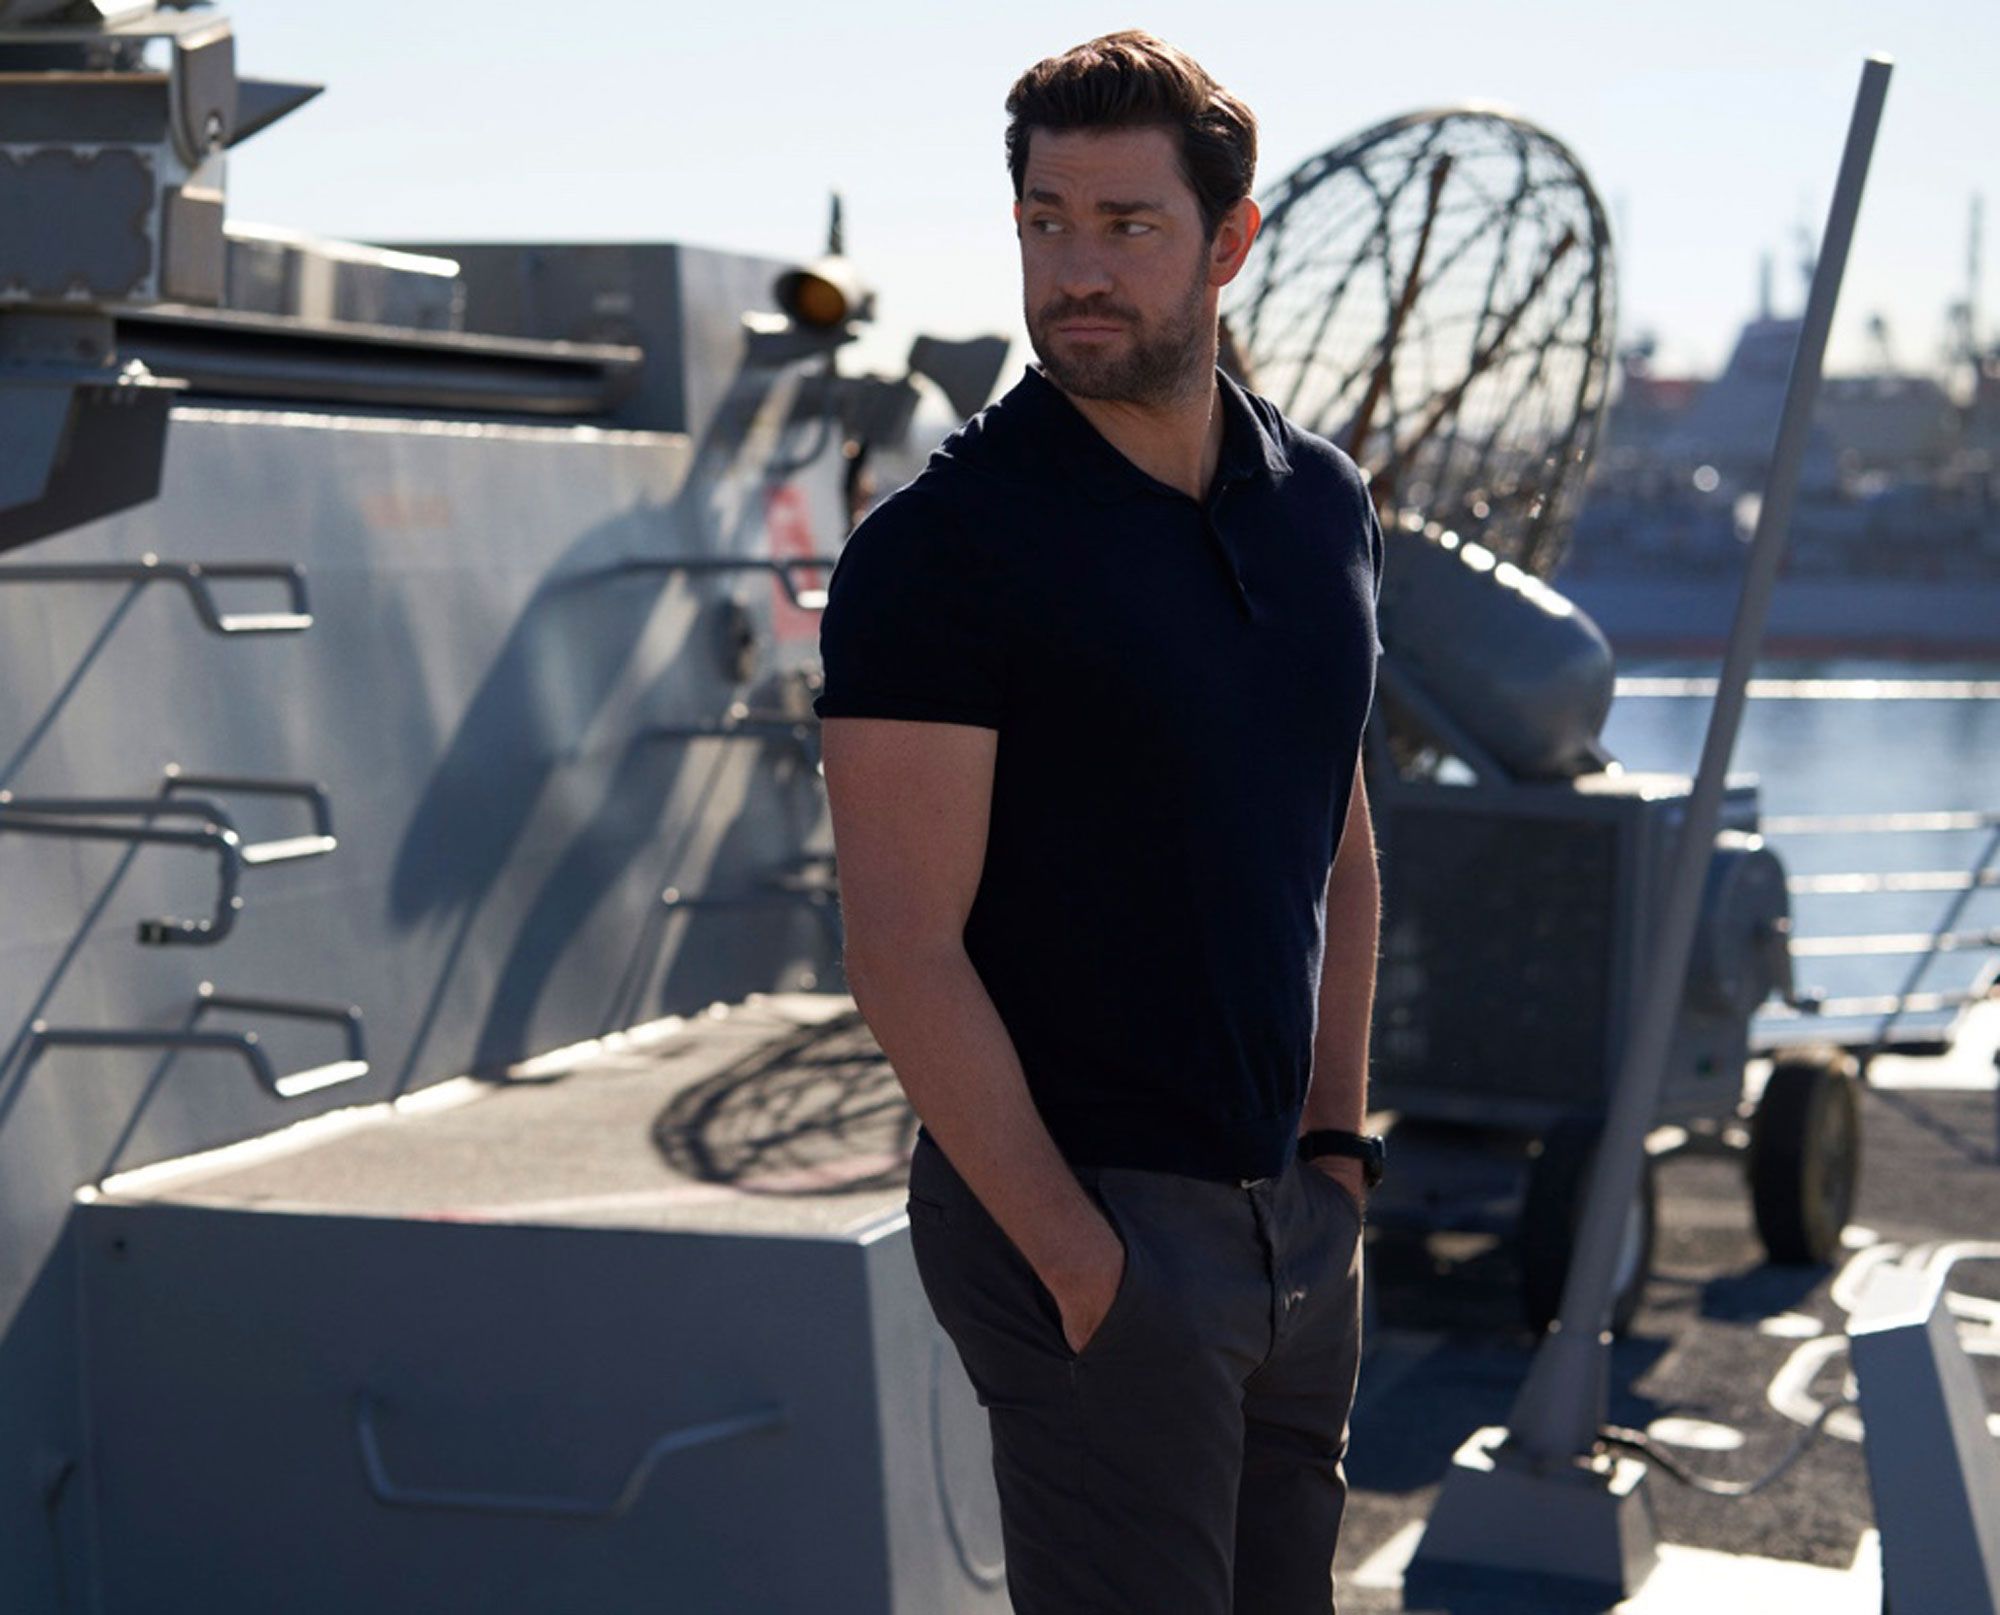 Jack Ryan Season 3: Prouction Updates, Cast, Plot, and Much More